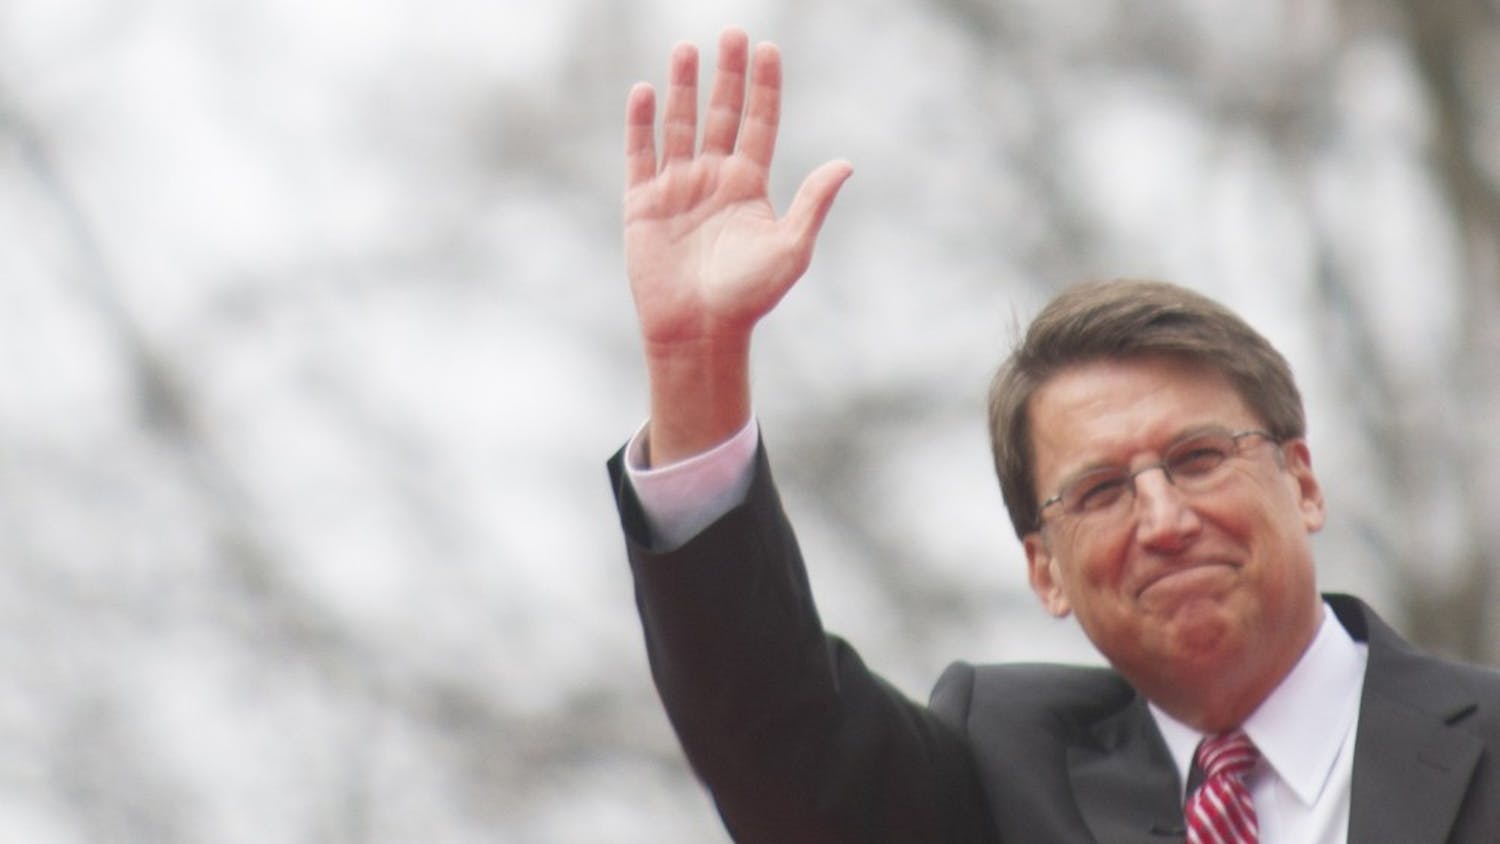 McCrory waves to the crowd after he take the oath.